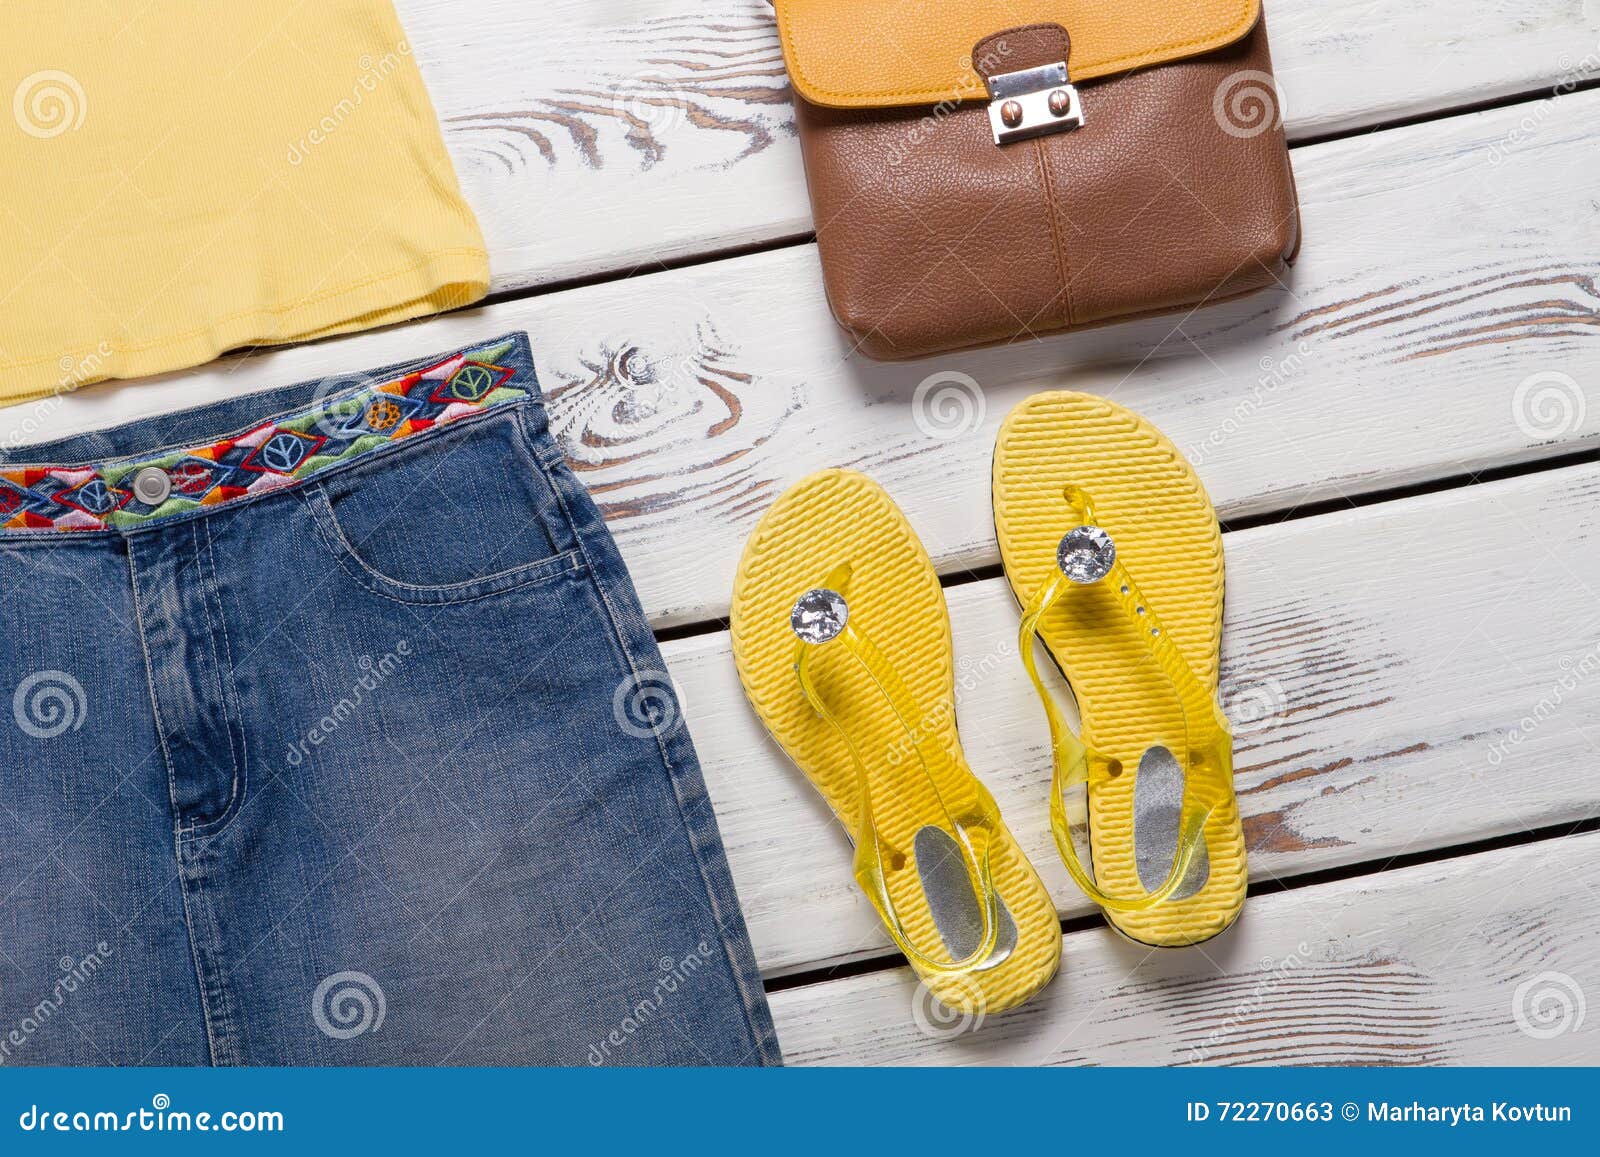 Girl Skirt Flip Flops Stock Photos and Pictures - 351 Images